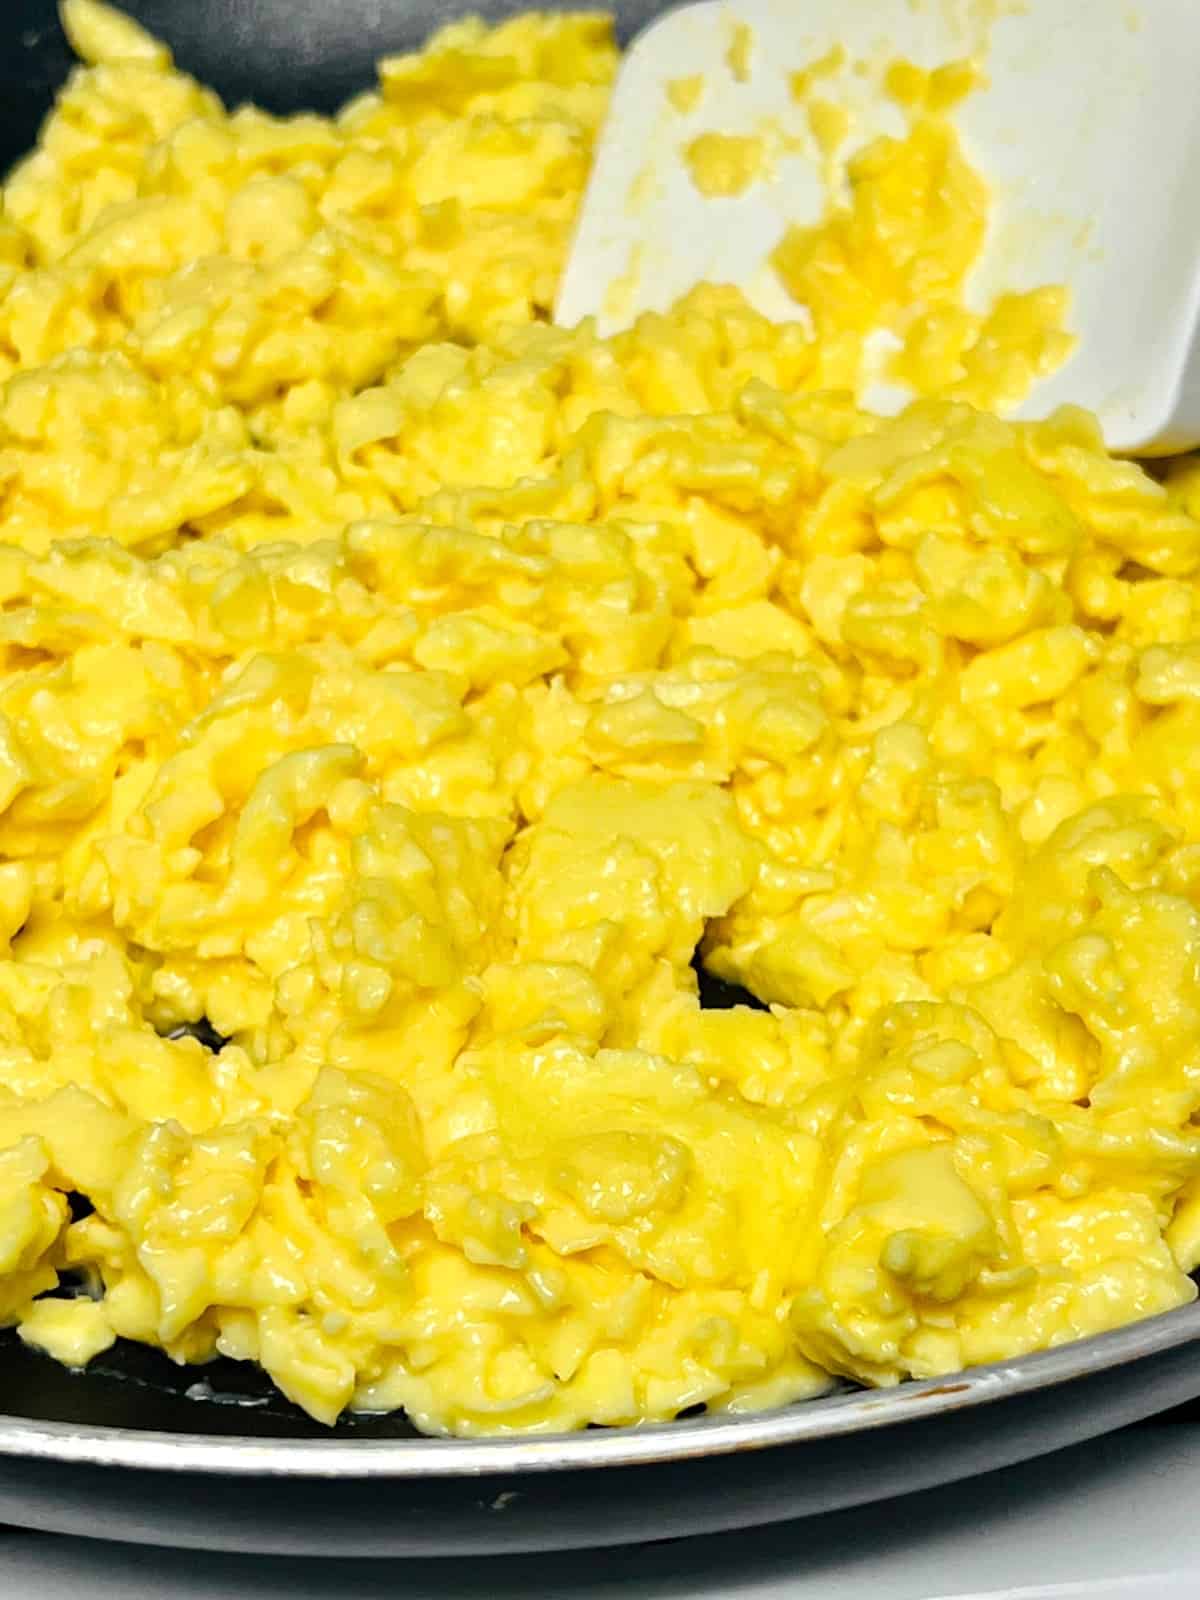 Closeup of how slow cooked scrambled eggs looks when done.